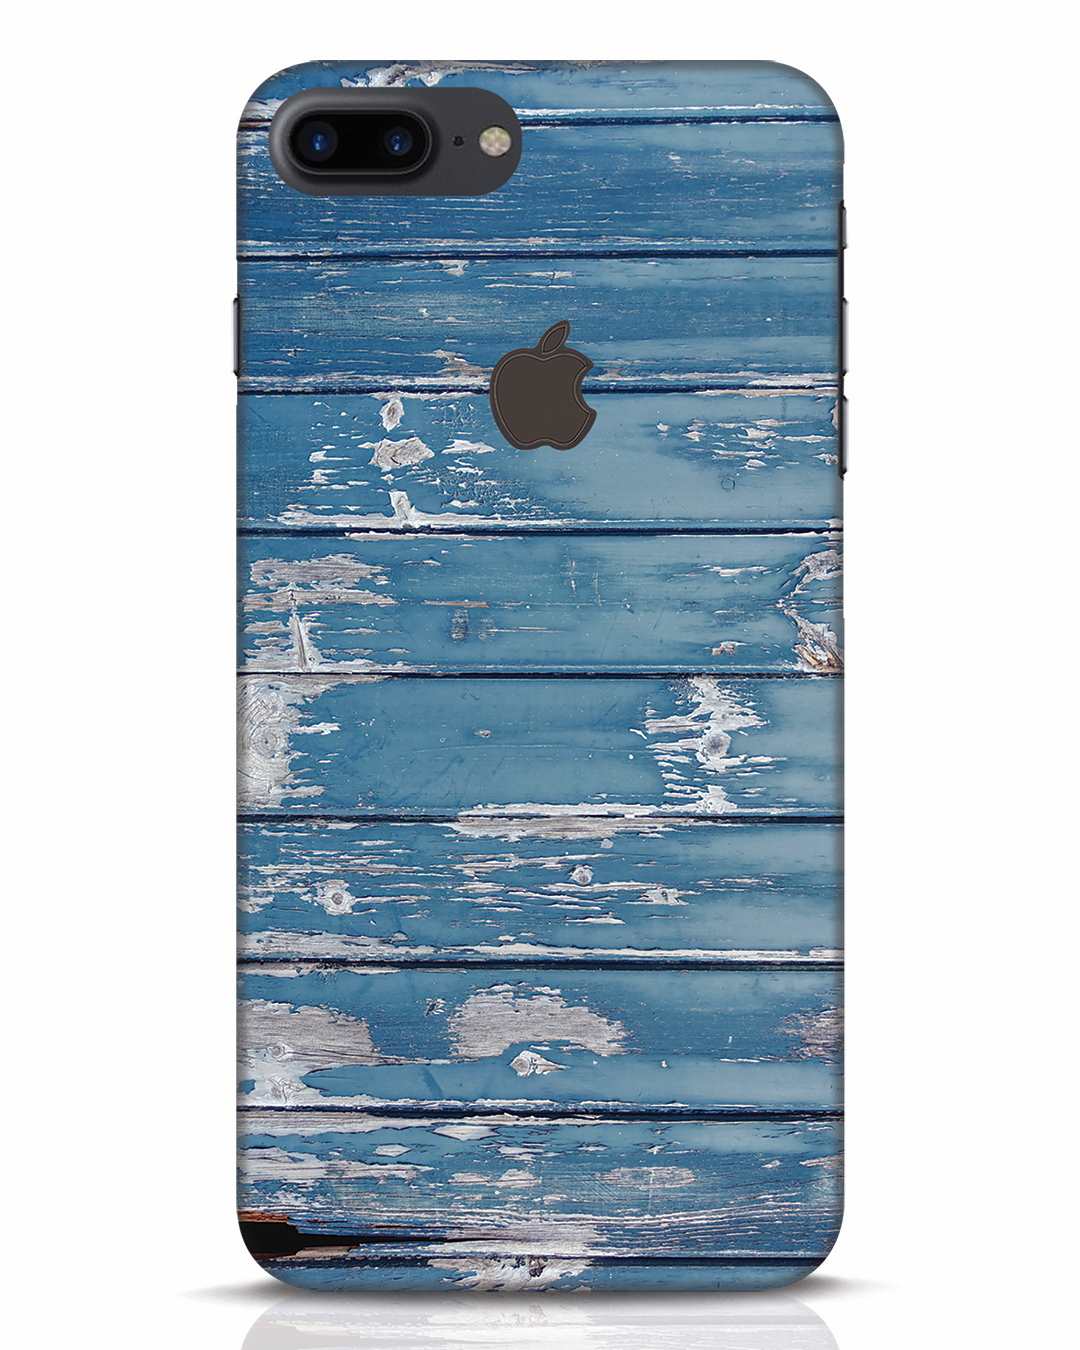 Timber iPhone 7 Plus Logo Cut Mobile Cover iPhone 7 Plus Logo Cut Mobile Covers Bewakoof.com